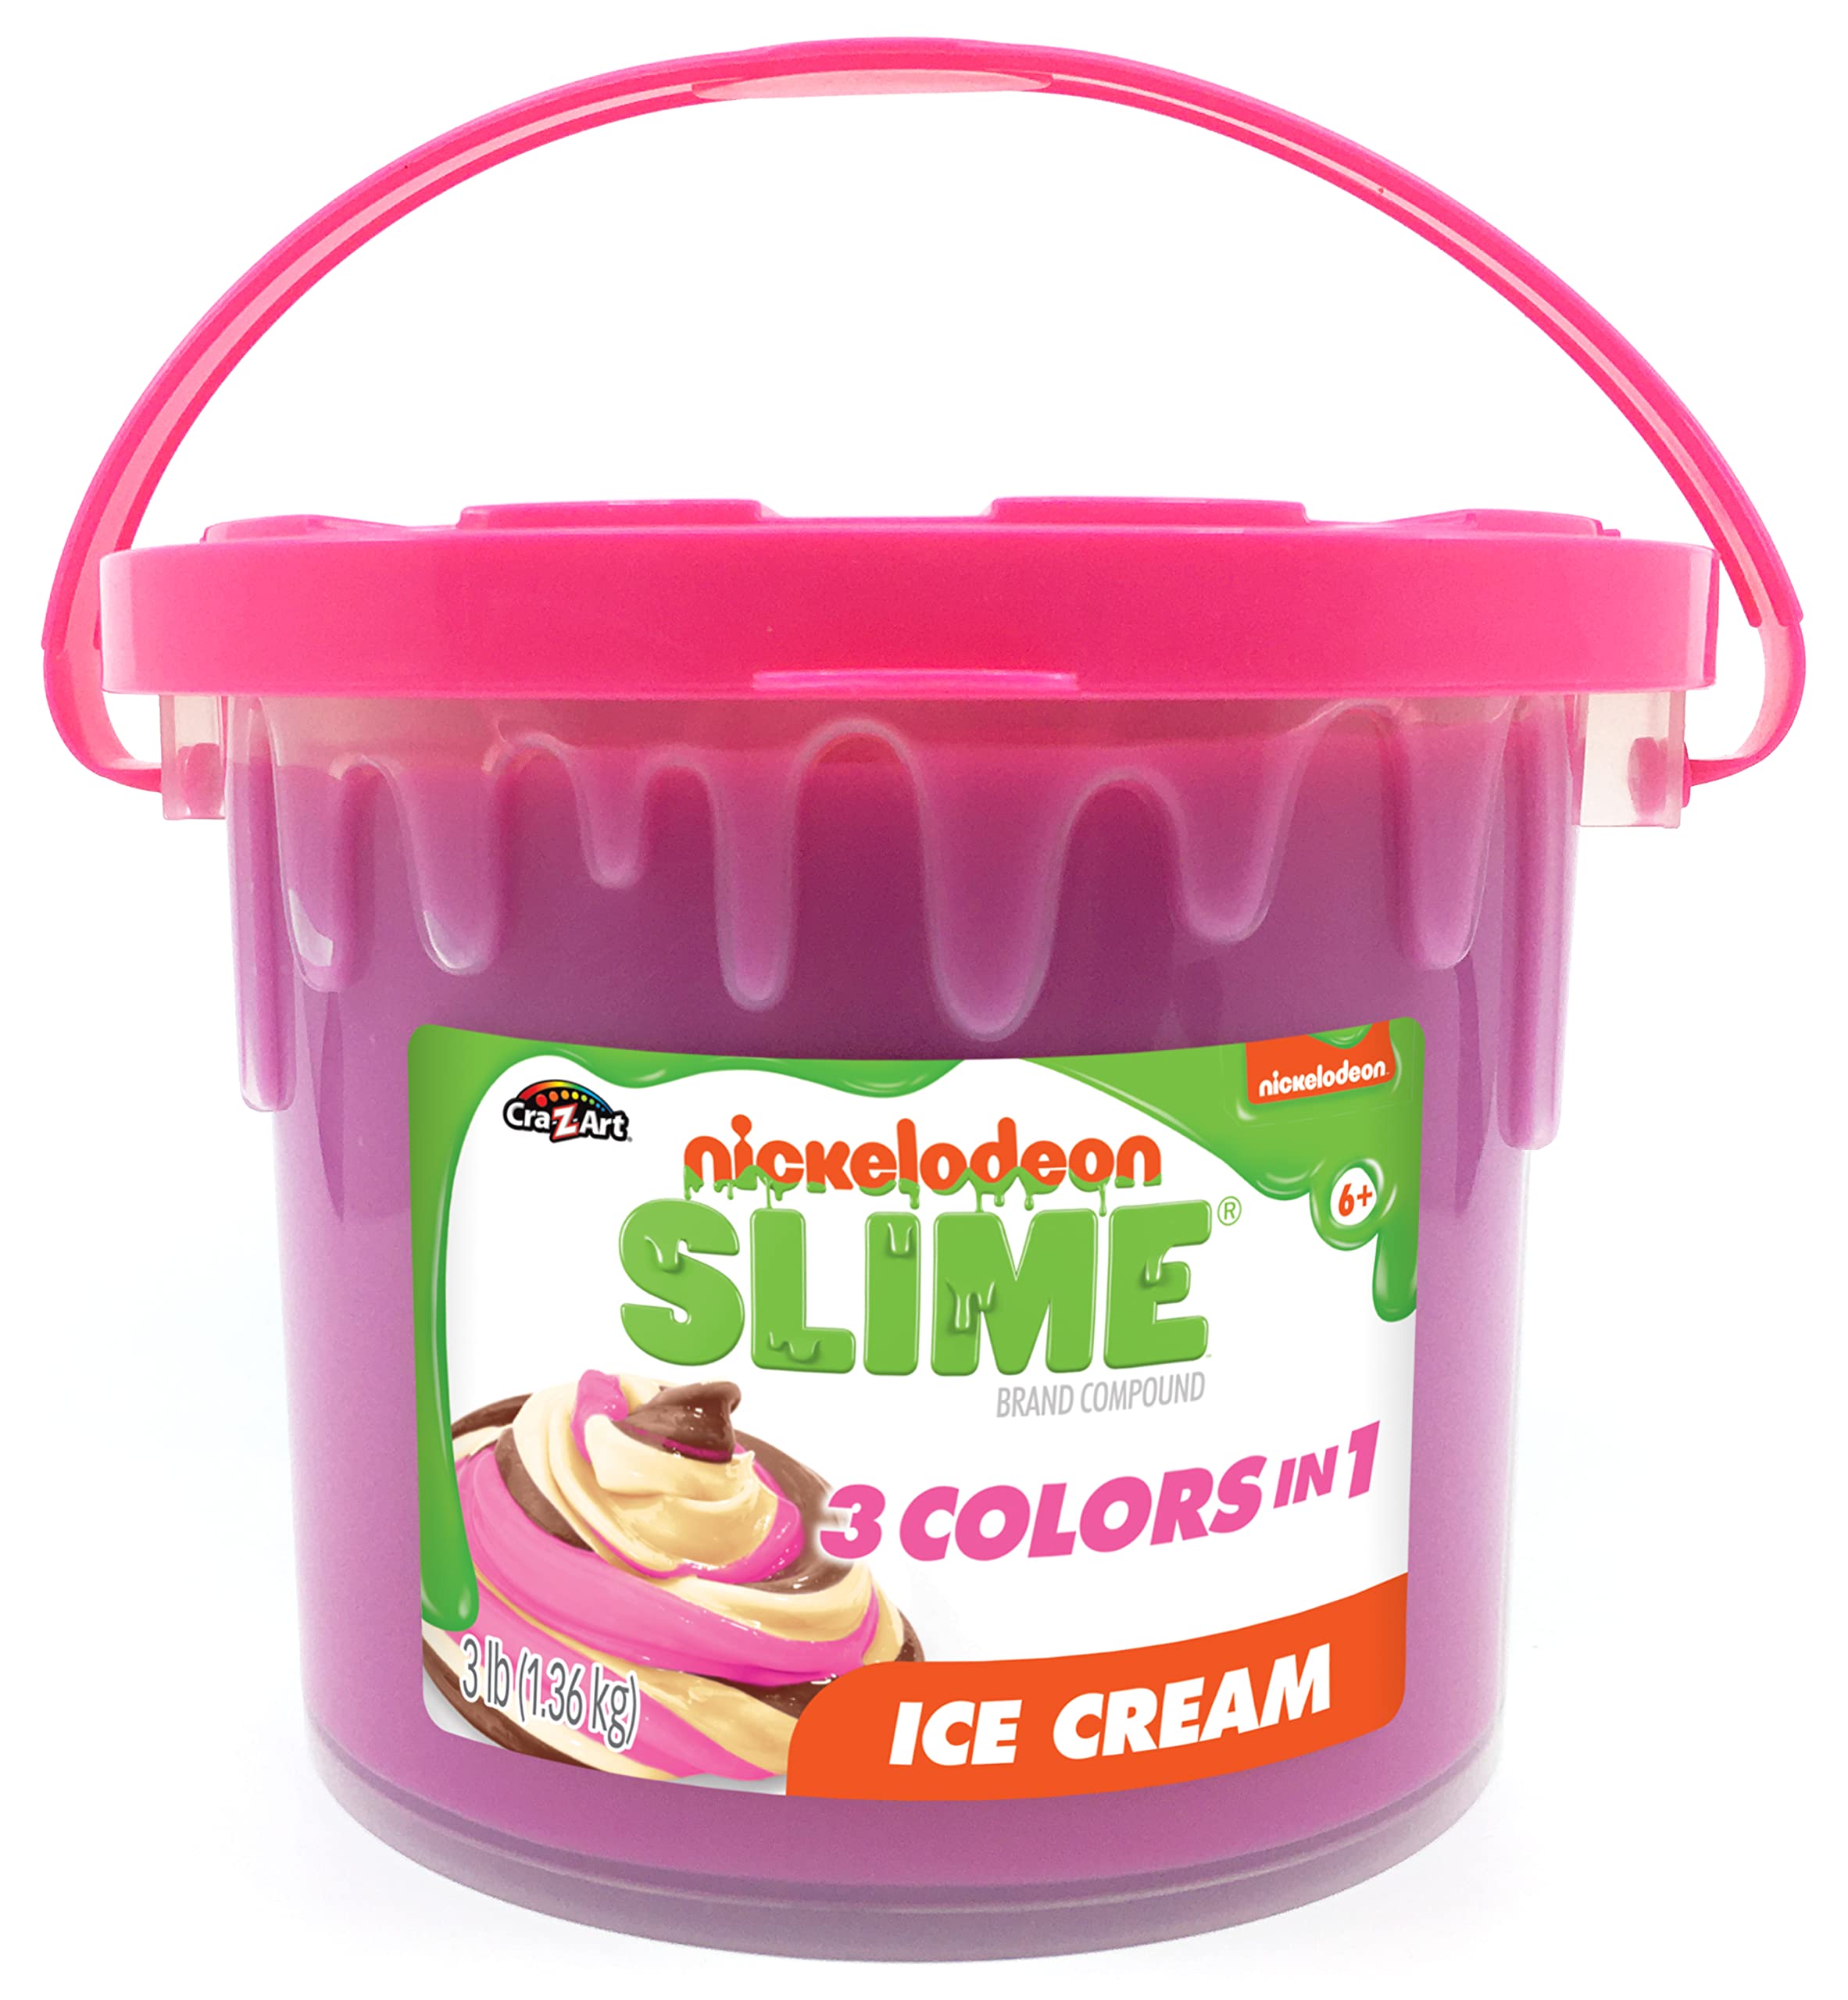 Nickelodeon Slime 3LB Ice cream Premade Slime Bucket - 3 colors-in-1 Strawberry, Vanilla and chocolate colored Slime